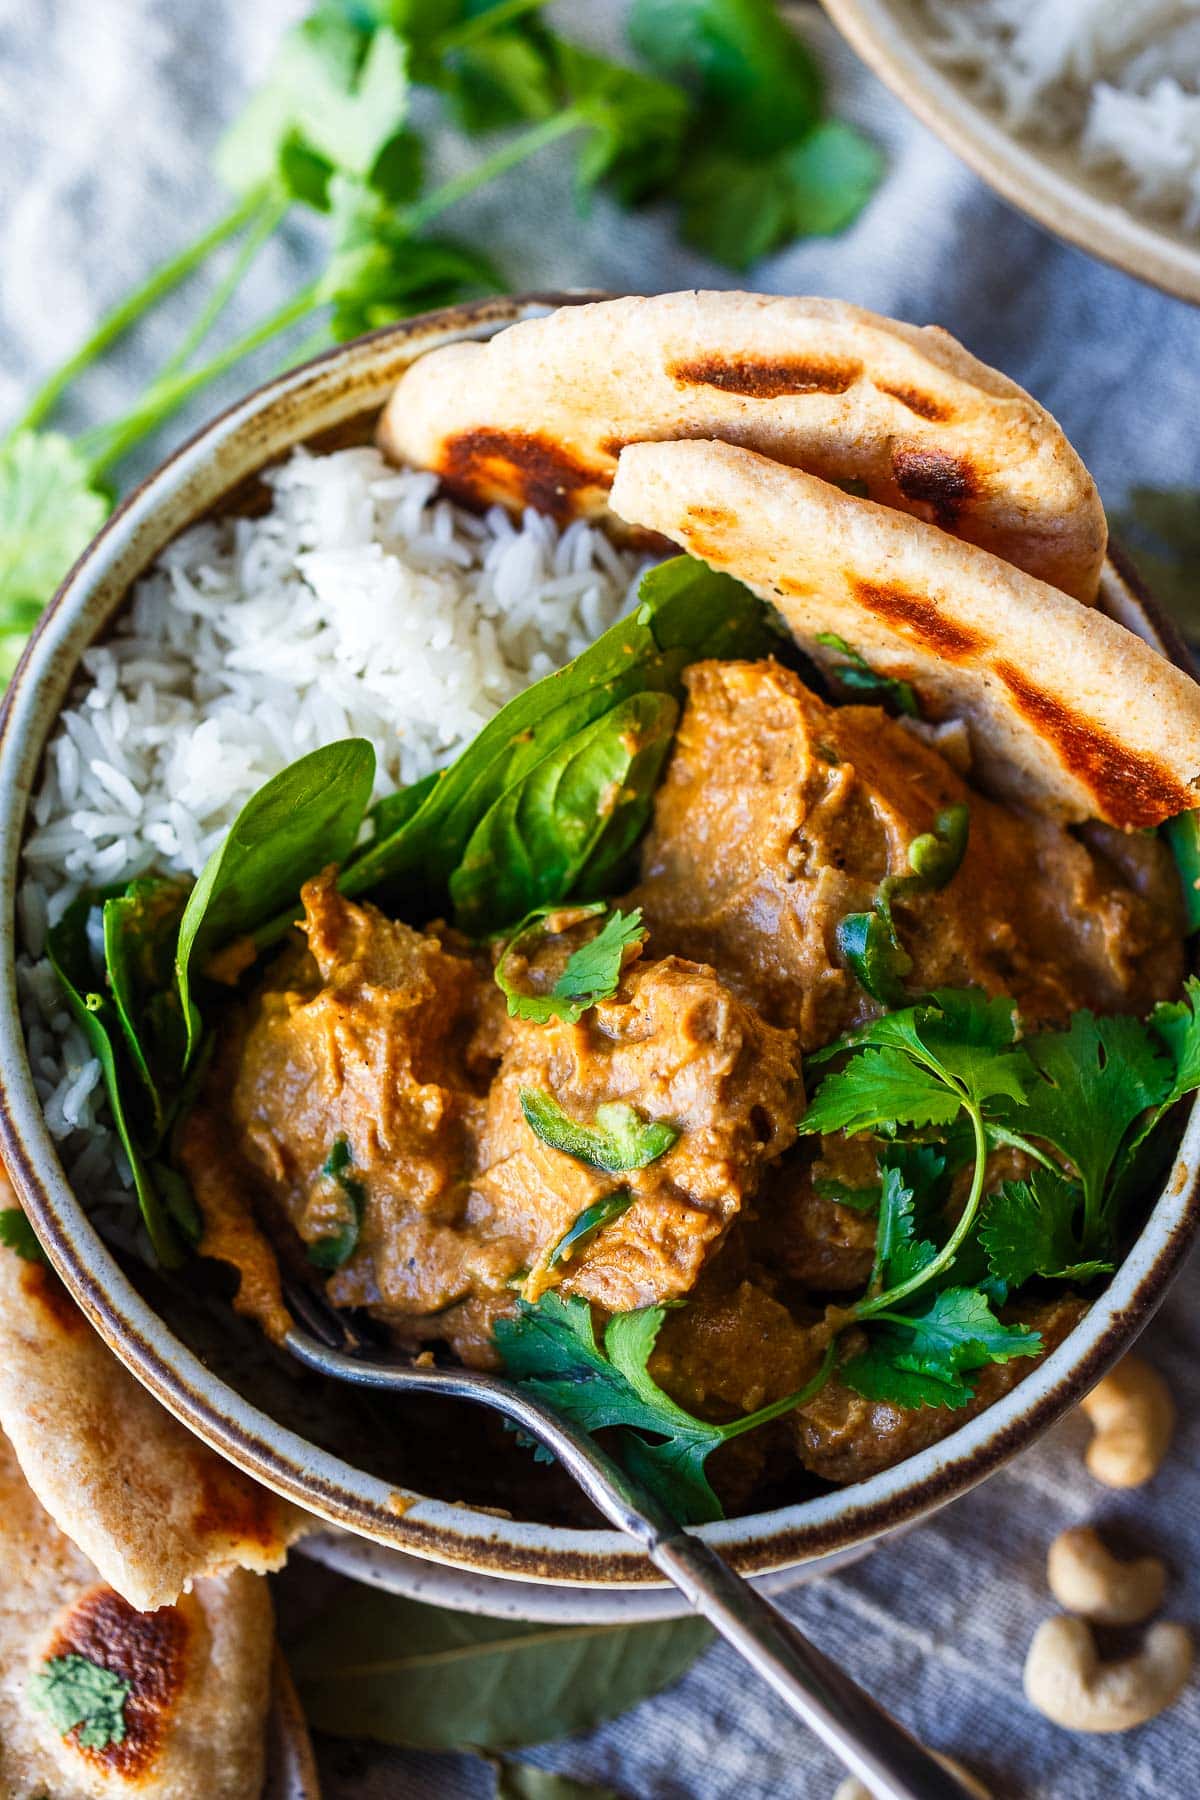 A simplified Indian classic, this Chicken Korma recipe is easy and lively with so much flavor! Tender chicken cooked in a luscious yogurt sauce with fragrant Indian spices. 